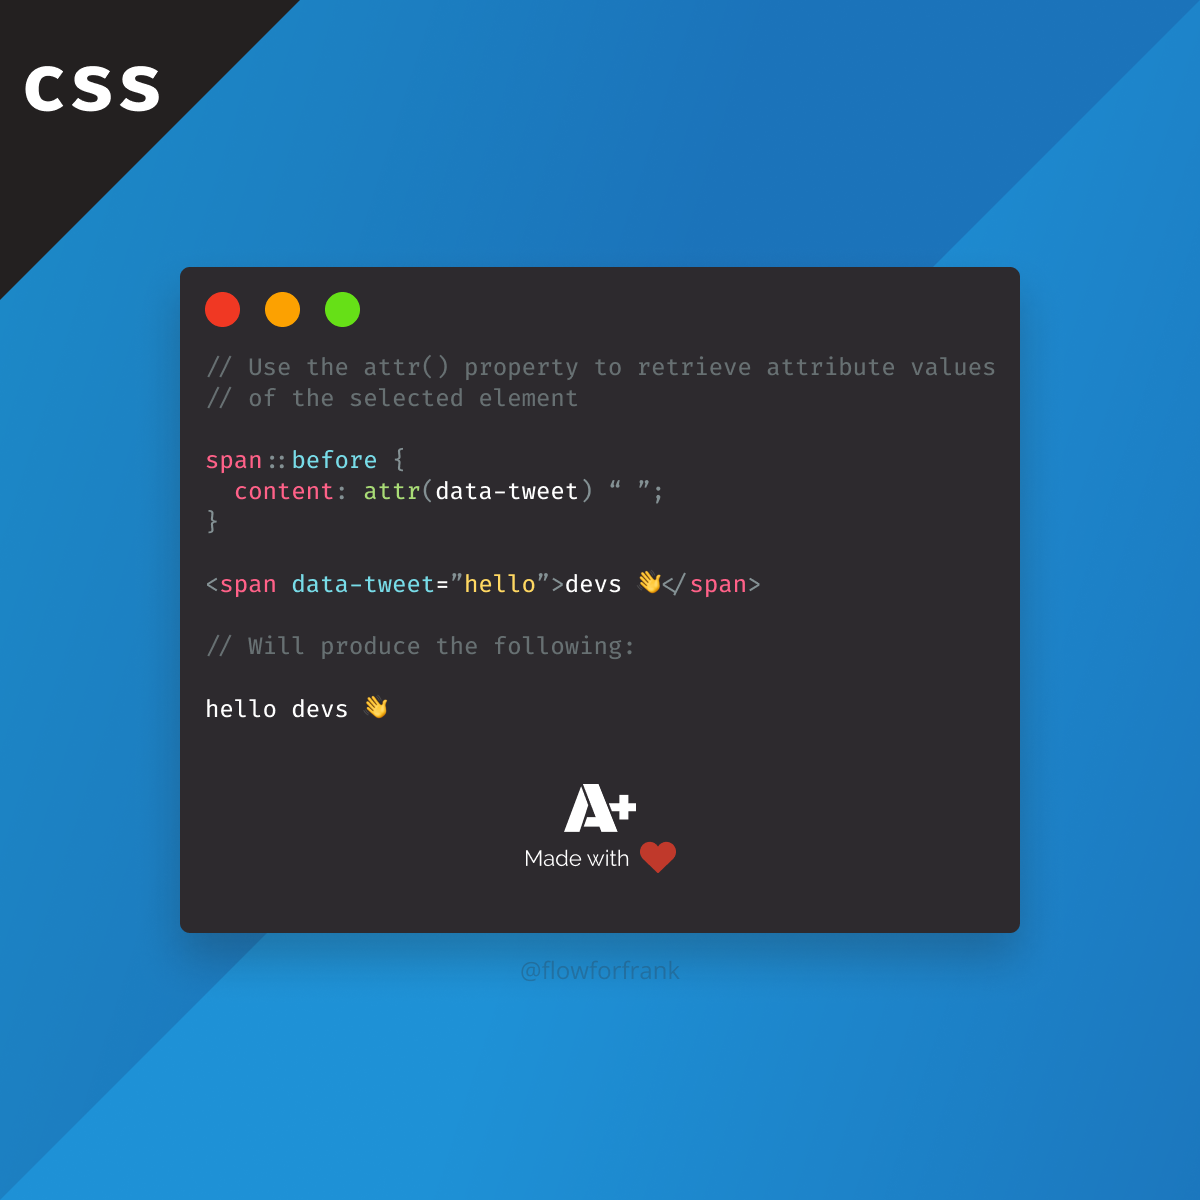 How to Retrieve Attribute Values in CSS